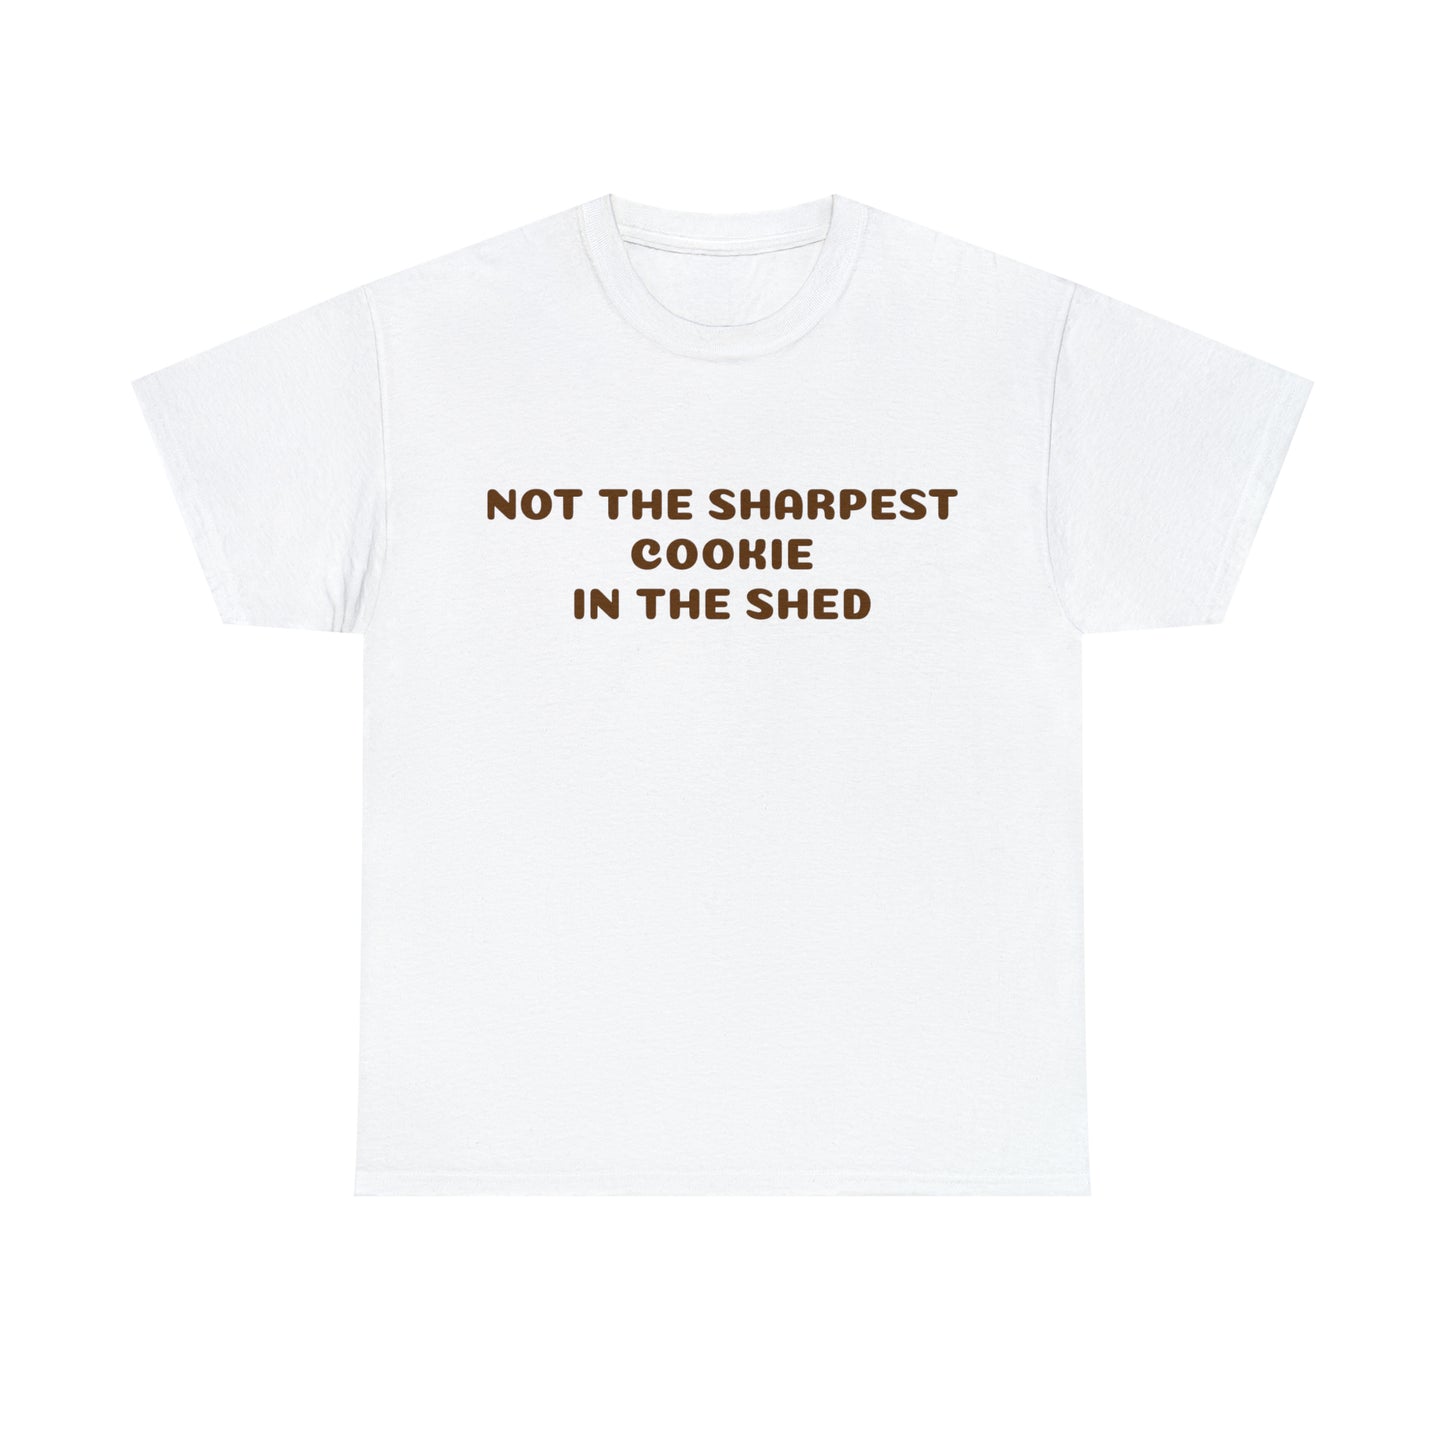 Custom parody T-shirt, Not the sharpest cookie in the shed shirt design